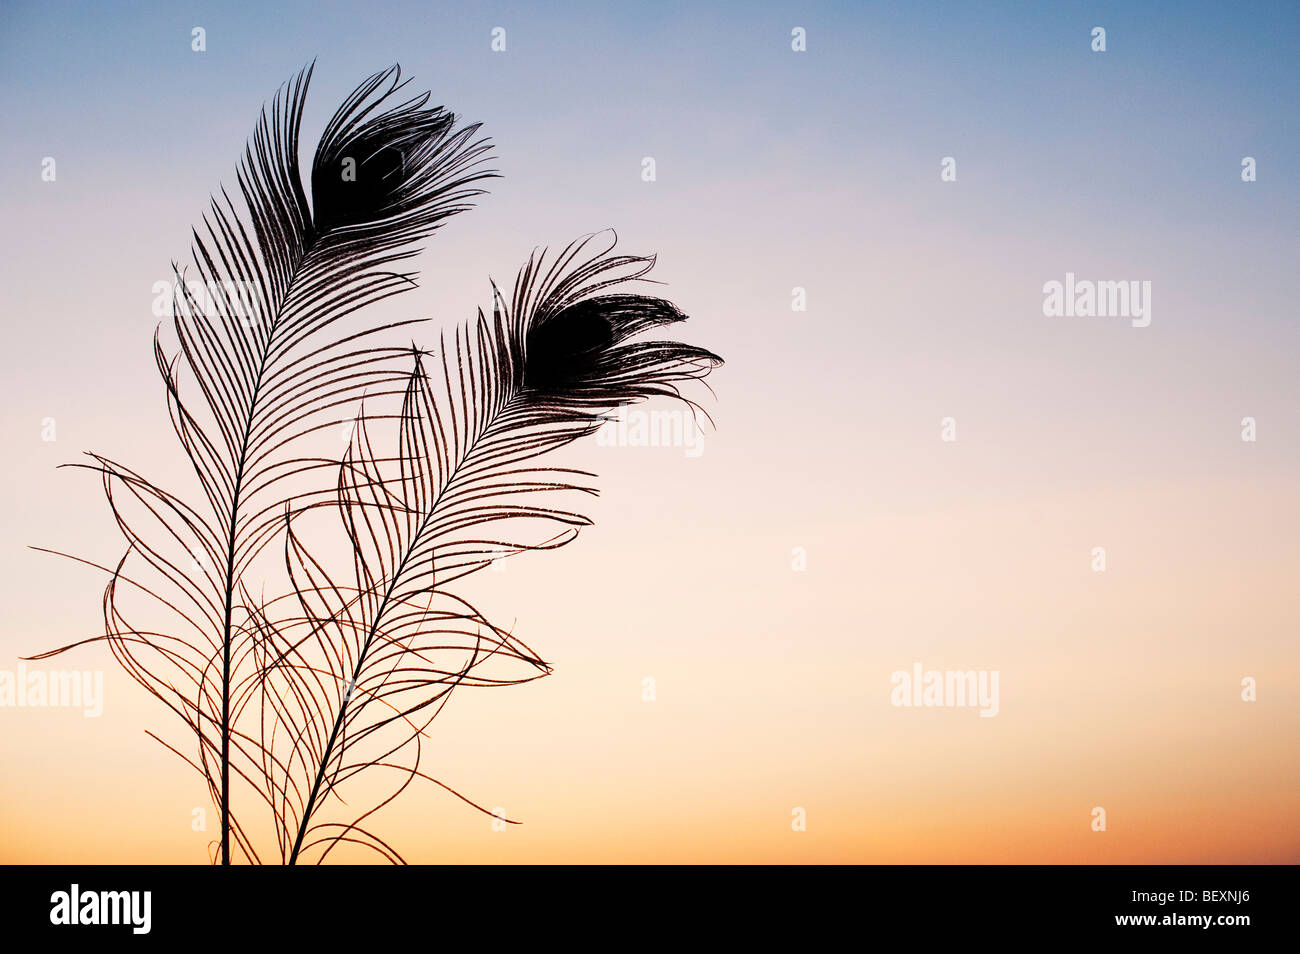 Silhouette peacock feathers against a dawn sunrise in India Stock Photo